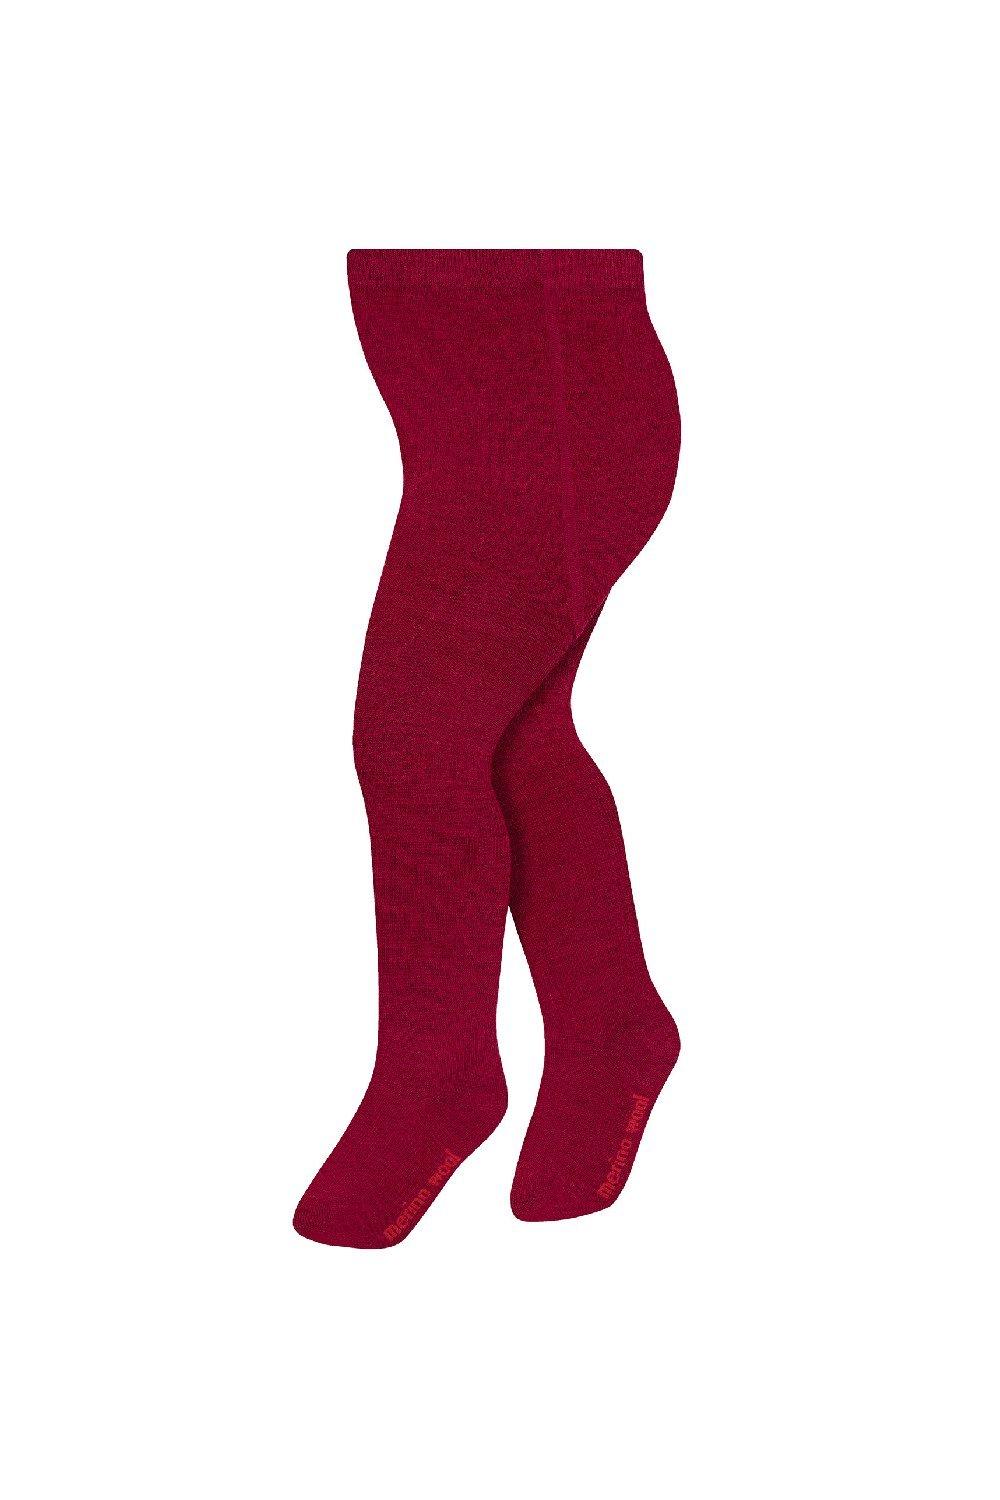 1 Pair Merino Wool Ribbed Design Cosy Warm Tights for Winter